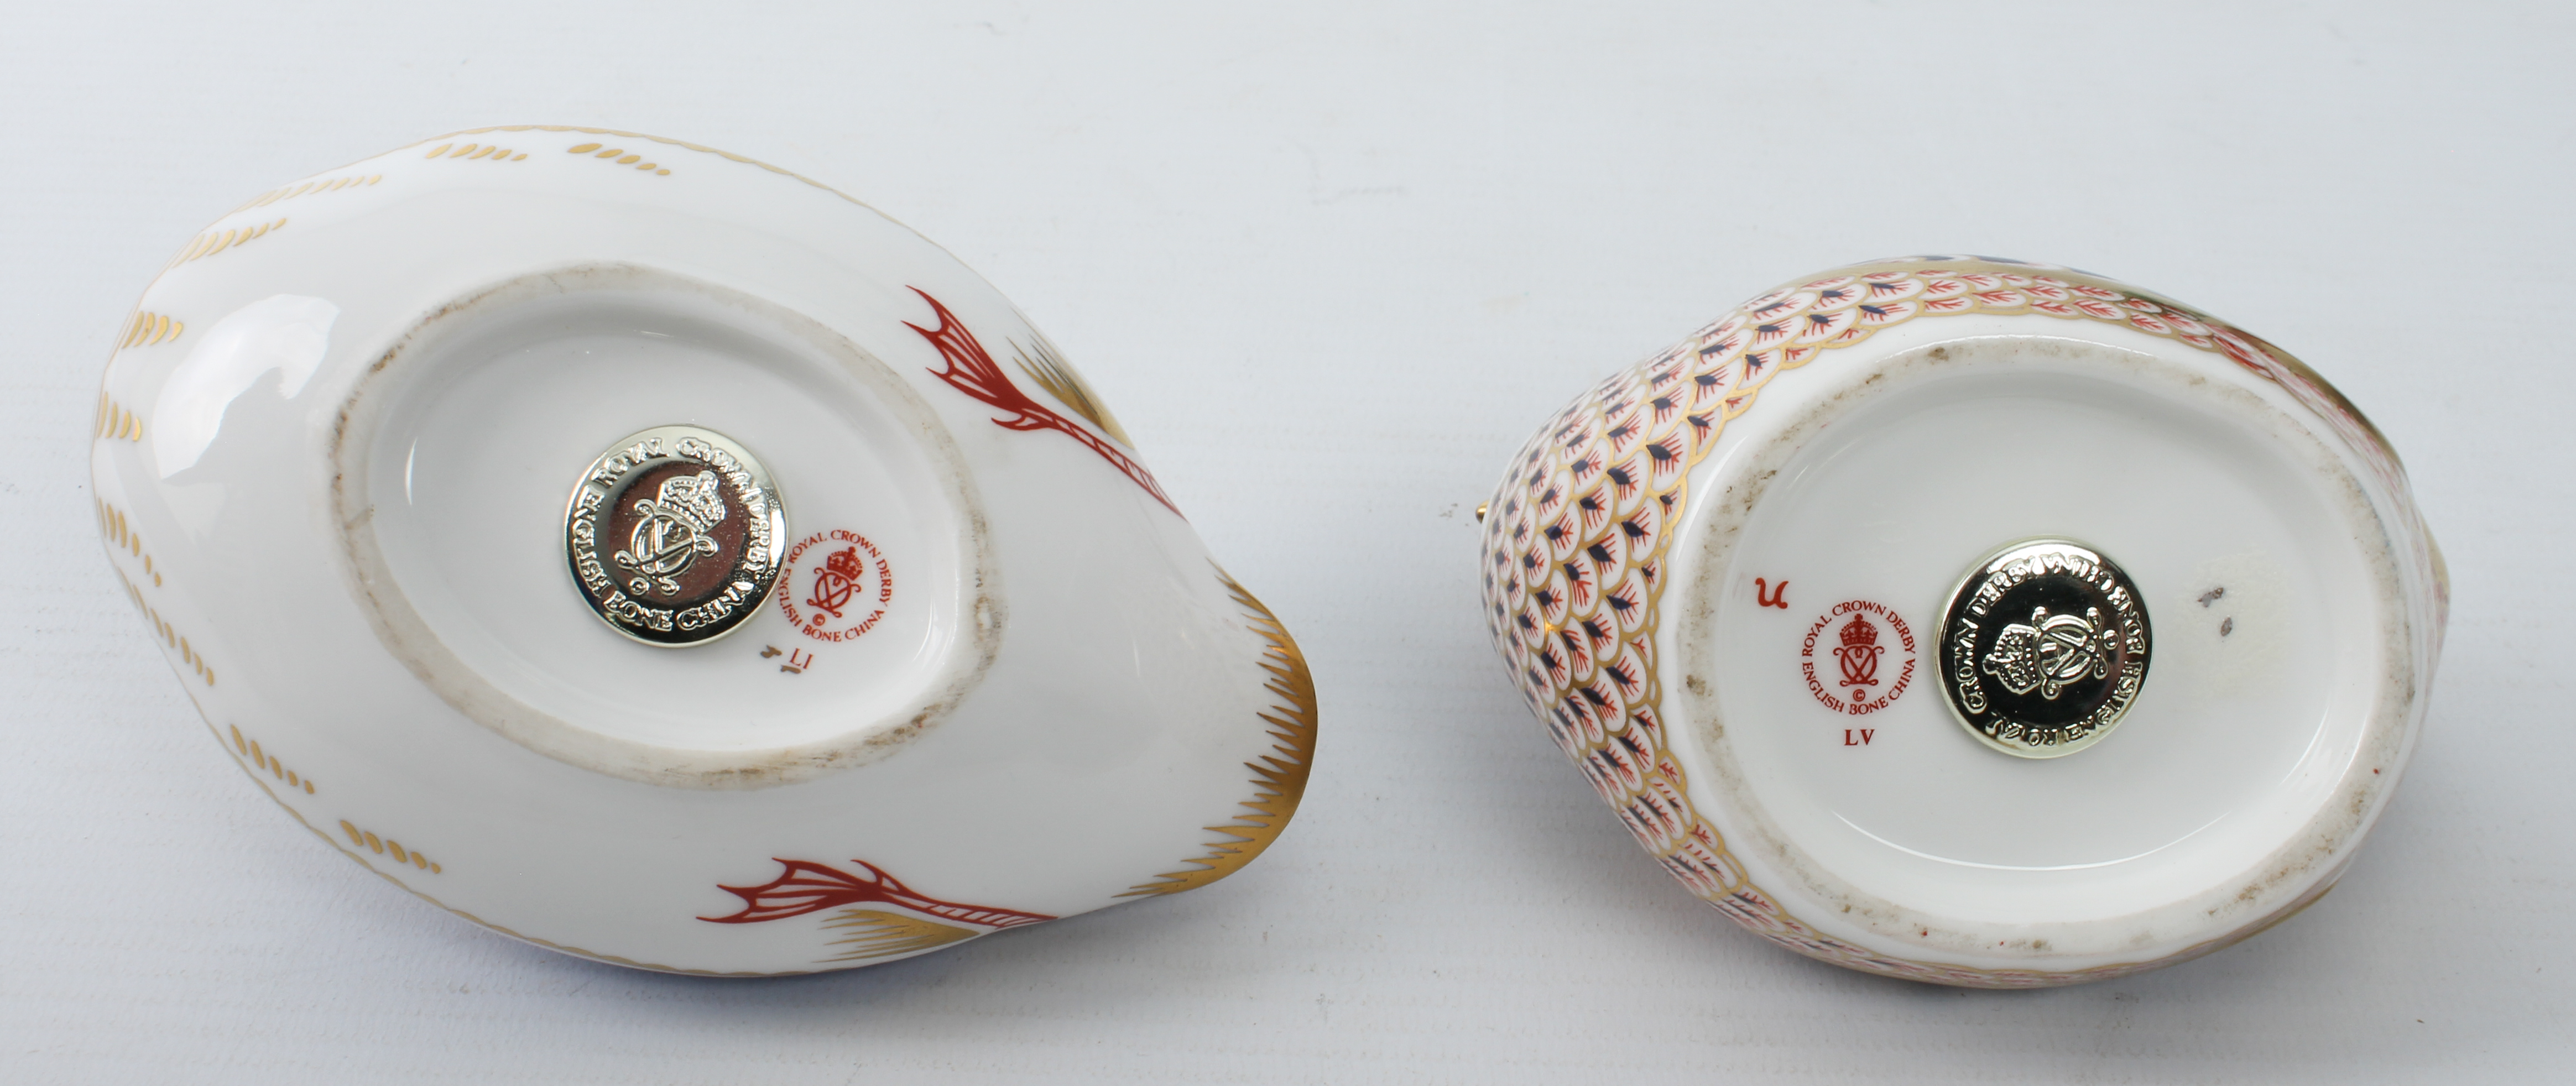 Two Royal Crown Derby paperweights - one a mandarin duck, the other a hen, both first quality and - Image 3 of 3